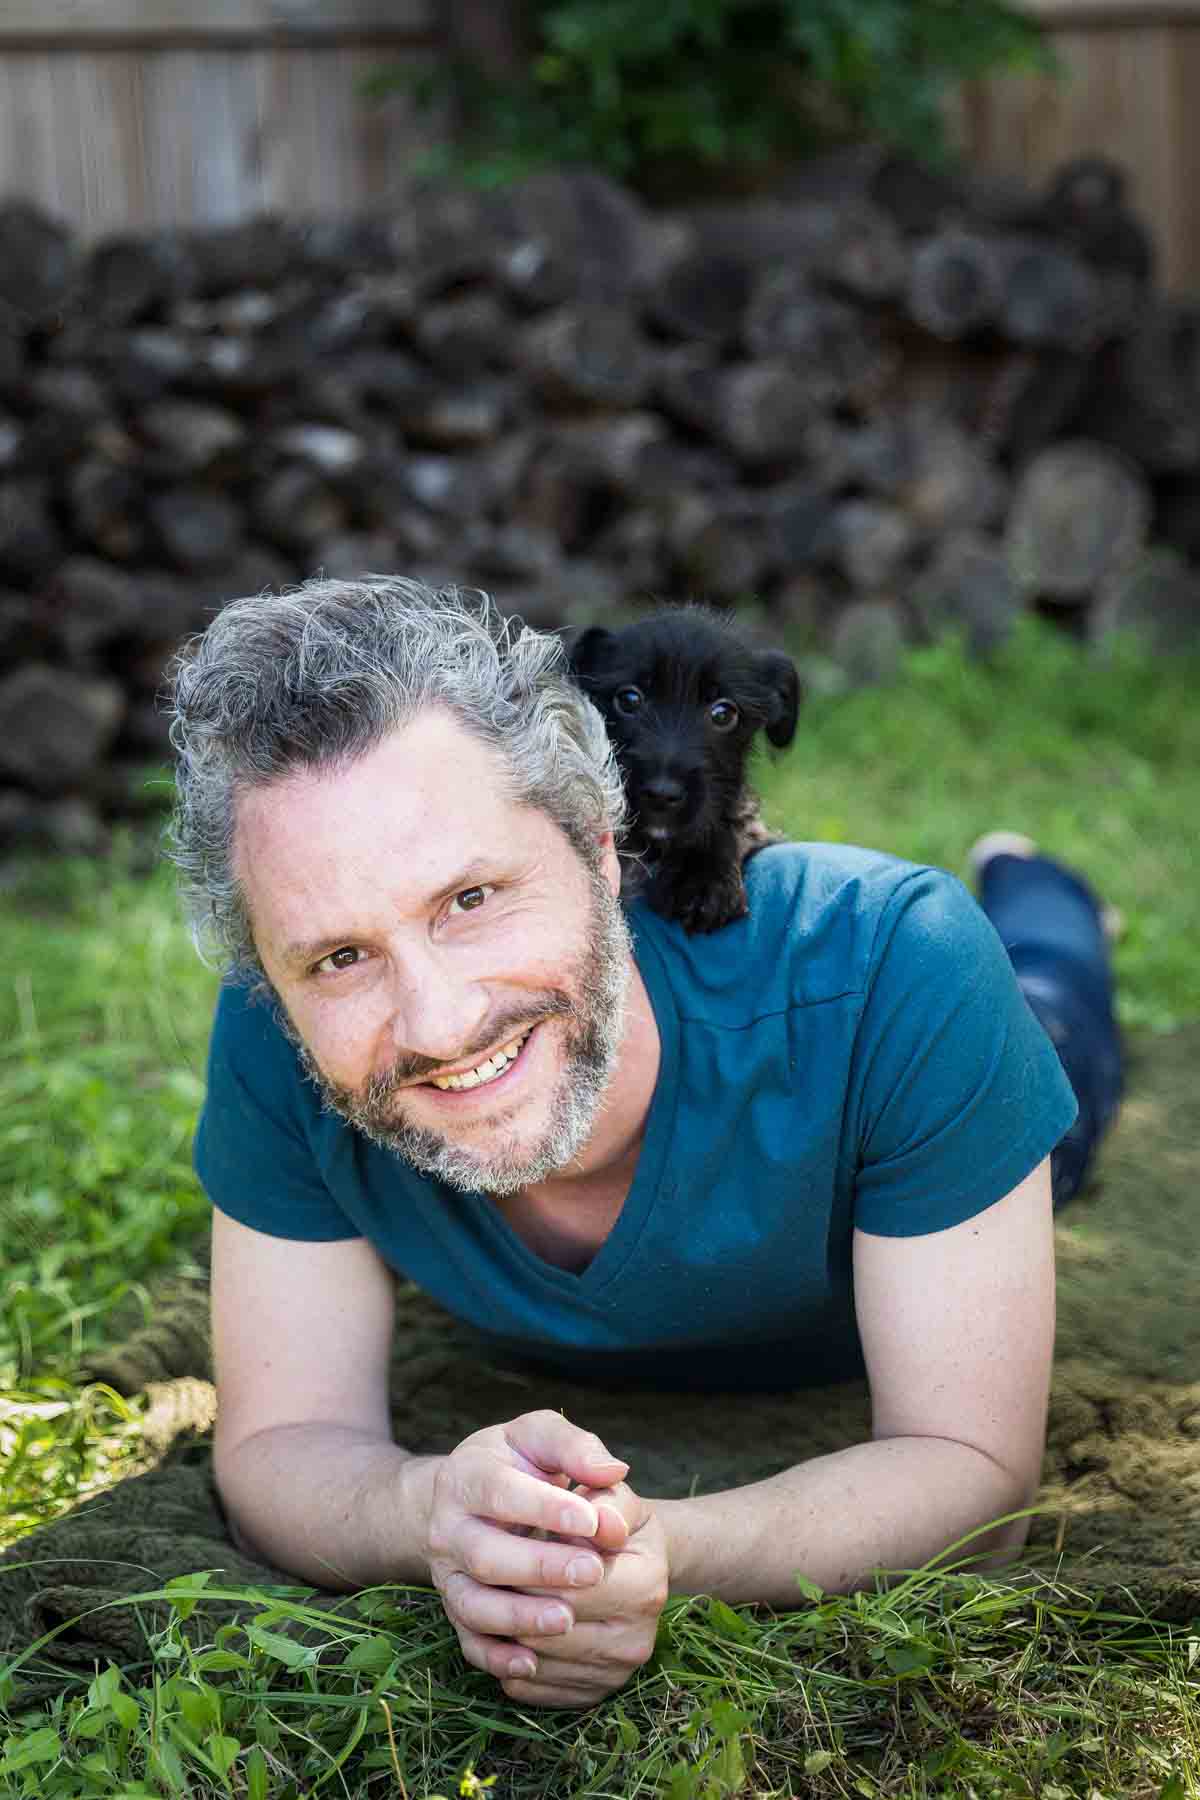 Man with gray hair, beard, and blue shirt lying on ground with black puppy on his shoulder for an article on pet photo tips